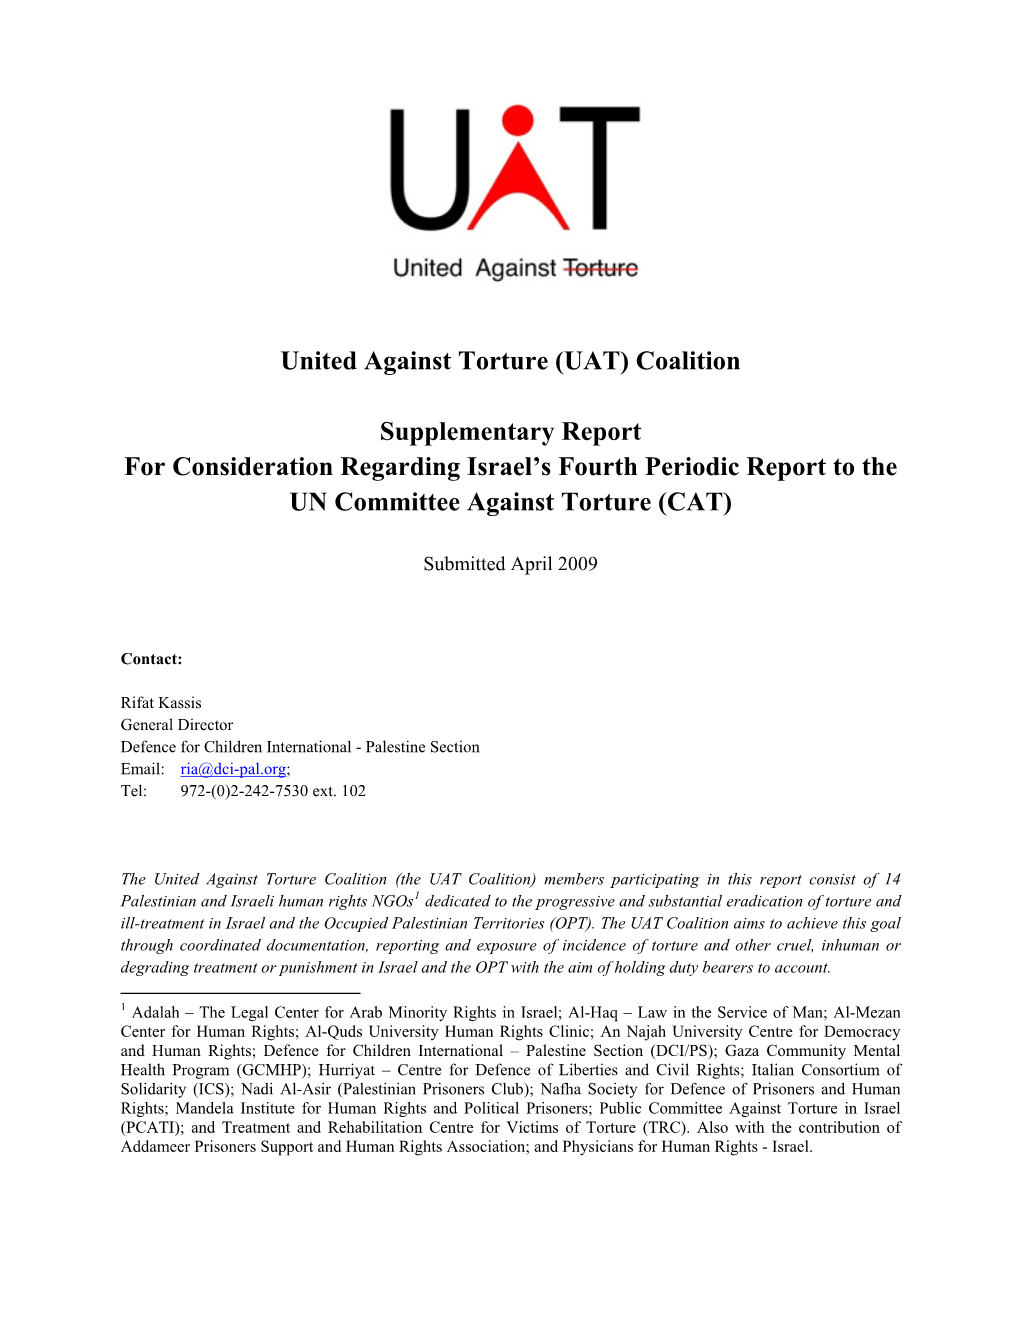 United Against Torture (UAT) Coalition Supplementary Report For